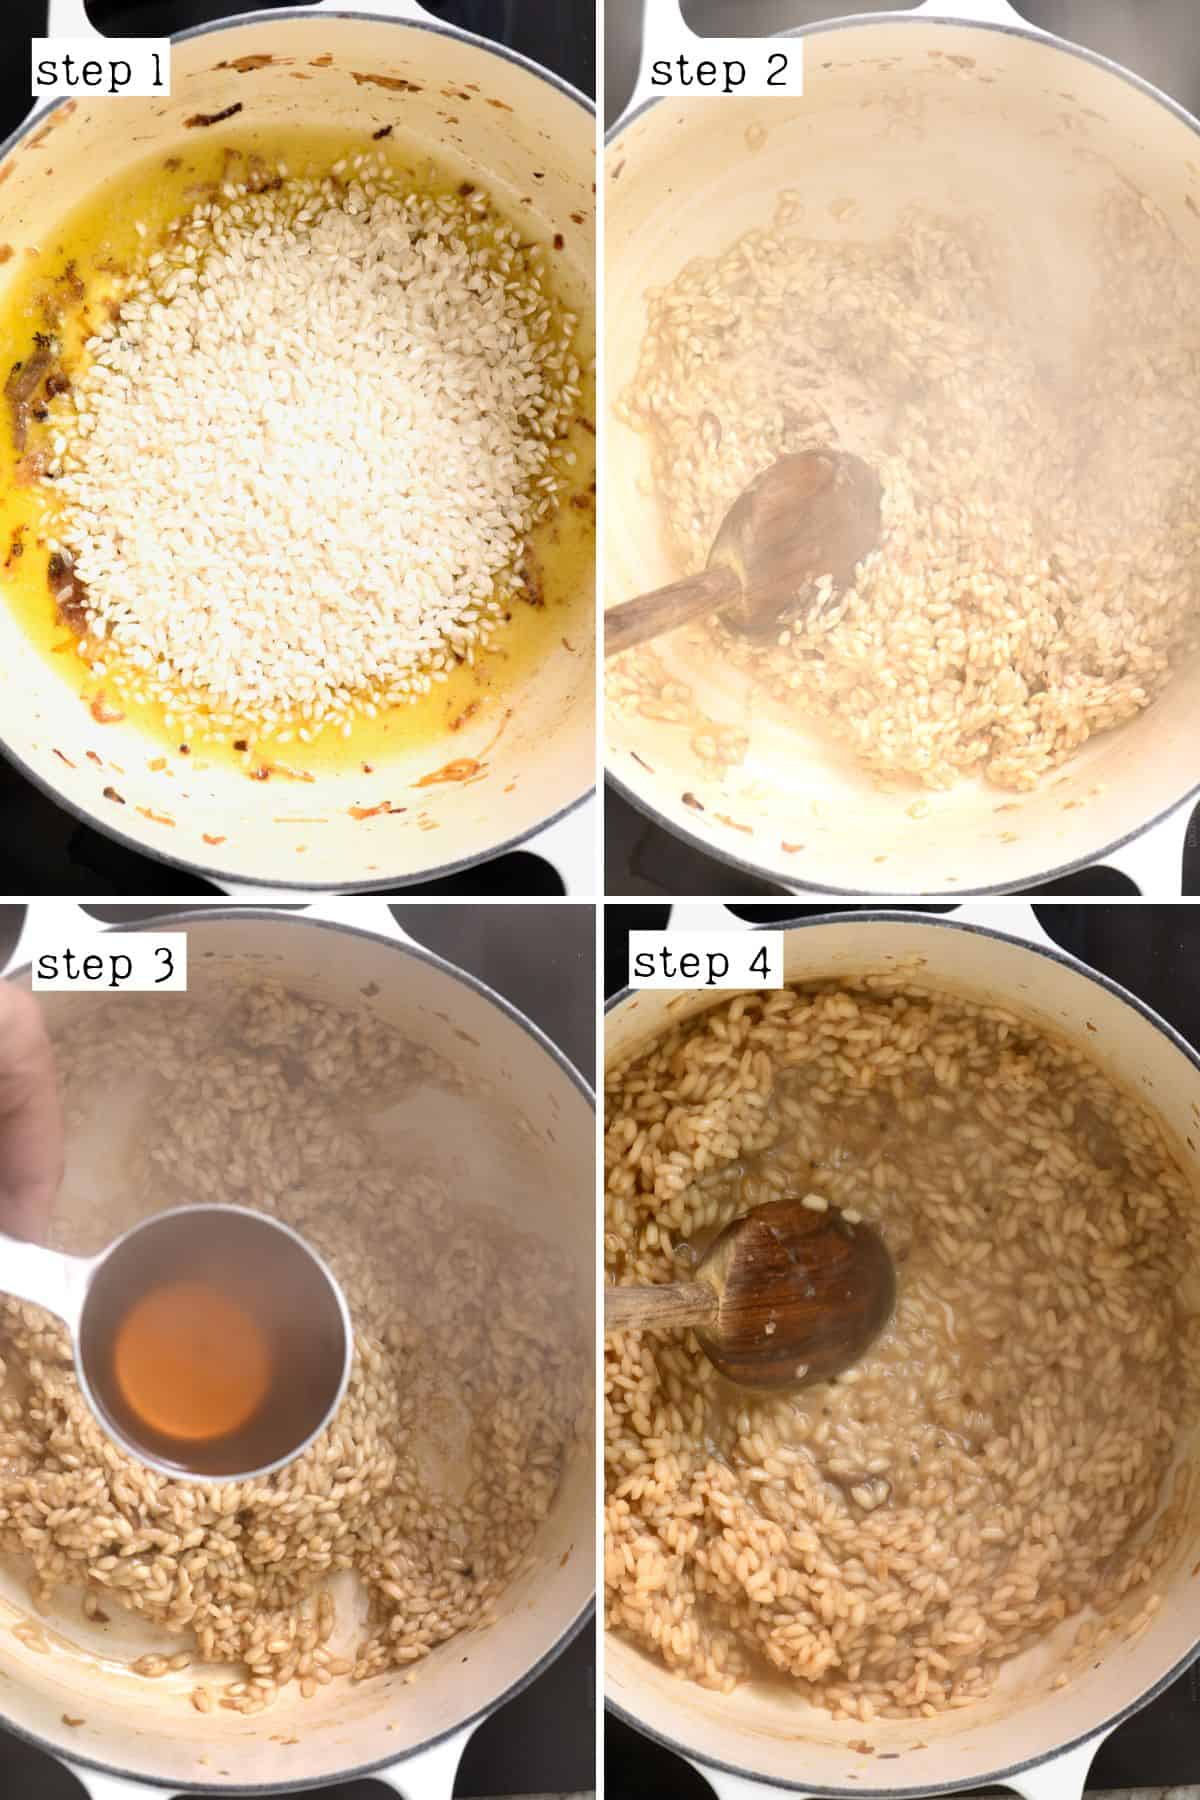 Steps for cooking risotto rice